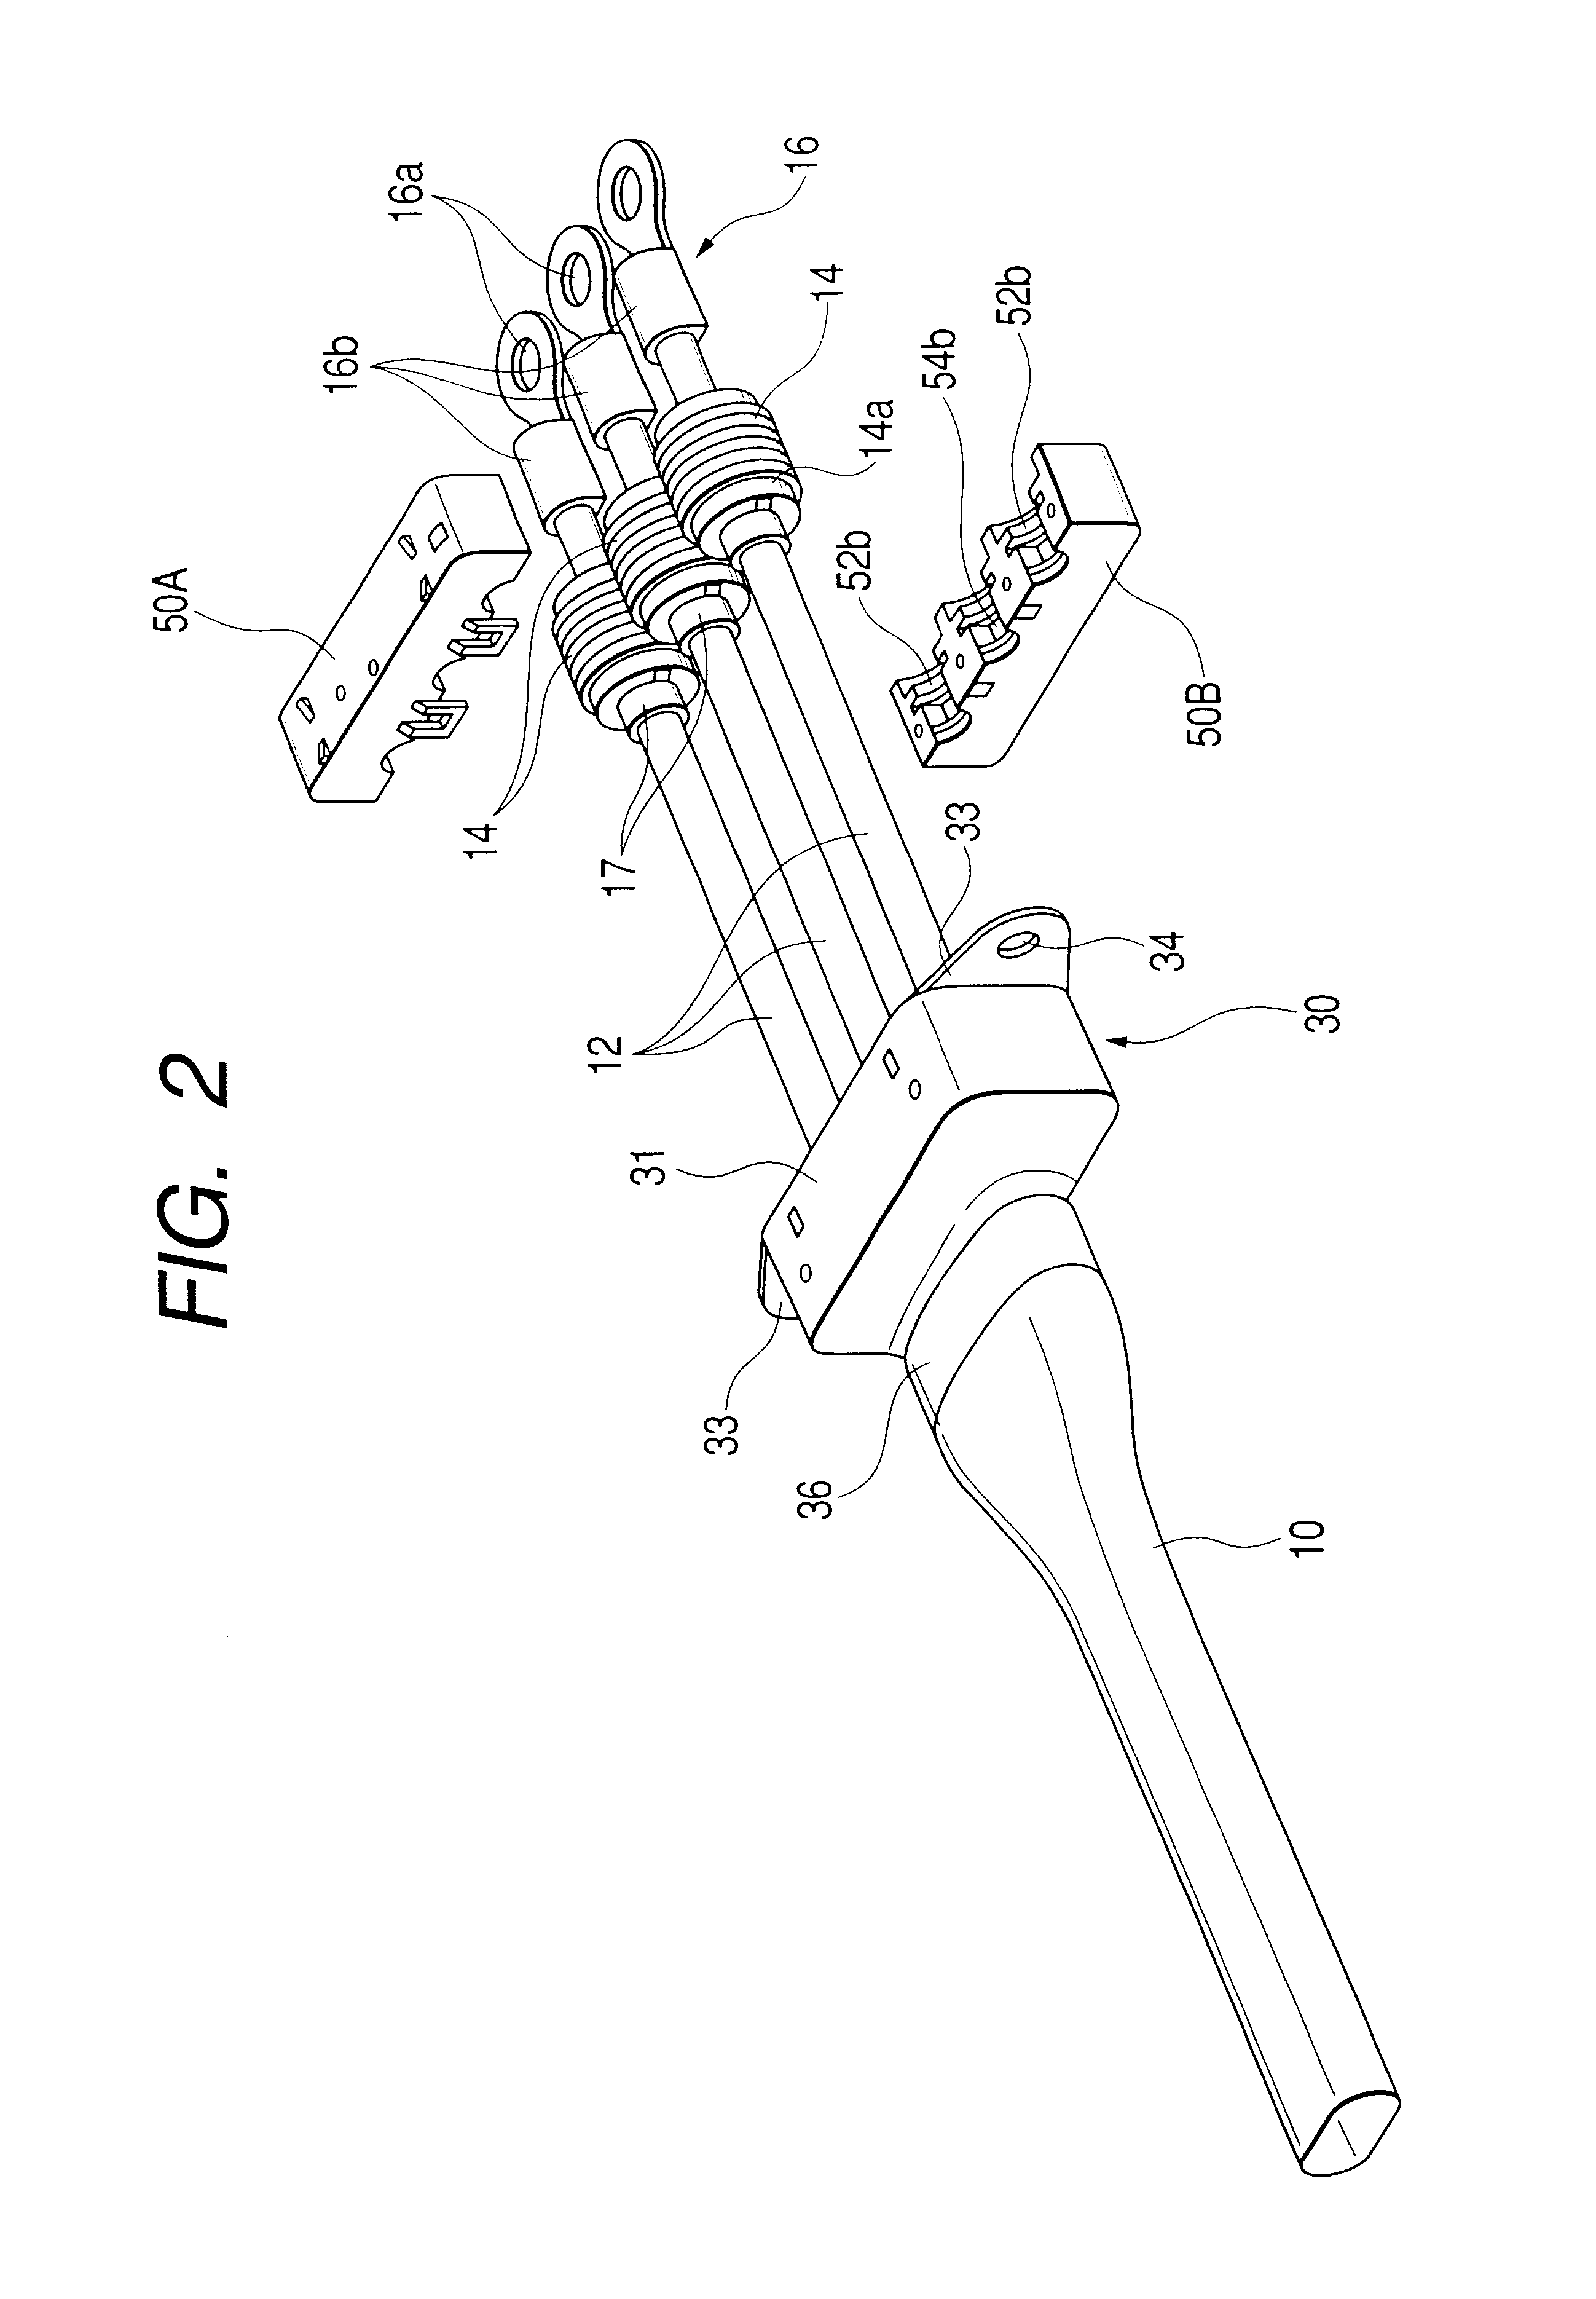 Electronic unit, shield cable connecting structure, connecting method, wires waterproof-connecting structure, and method